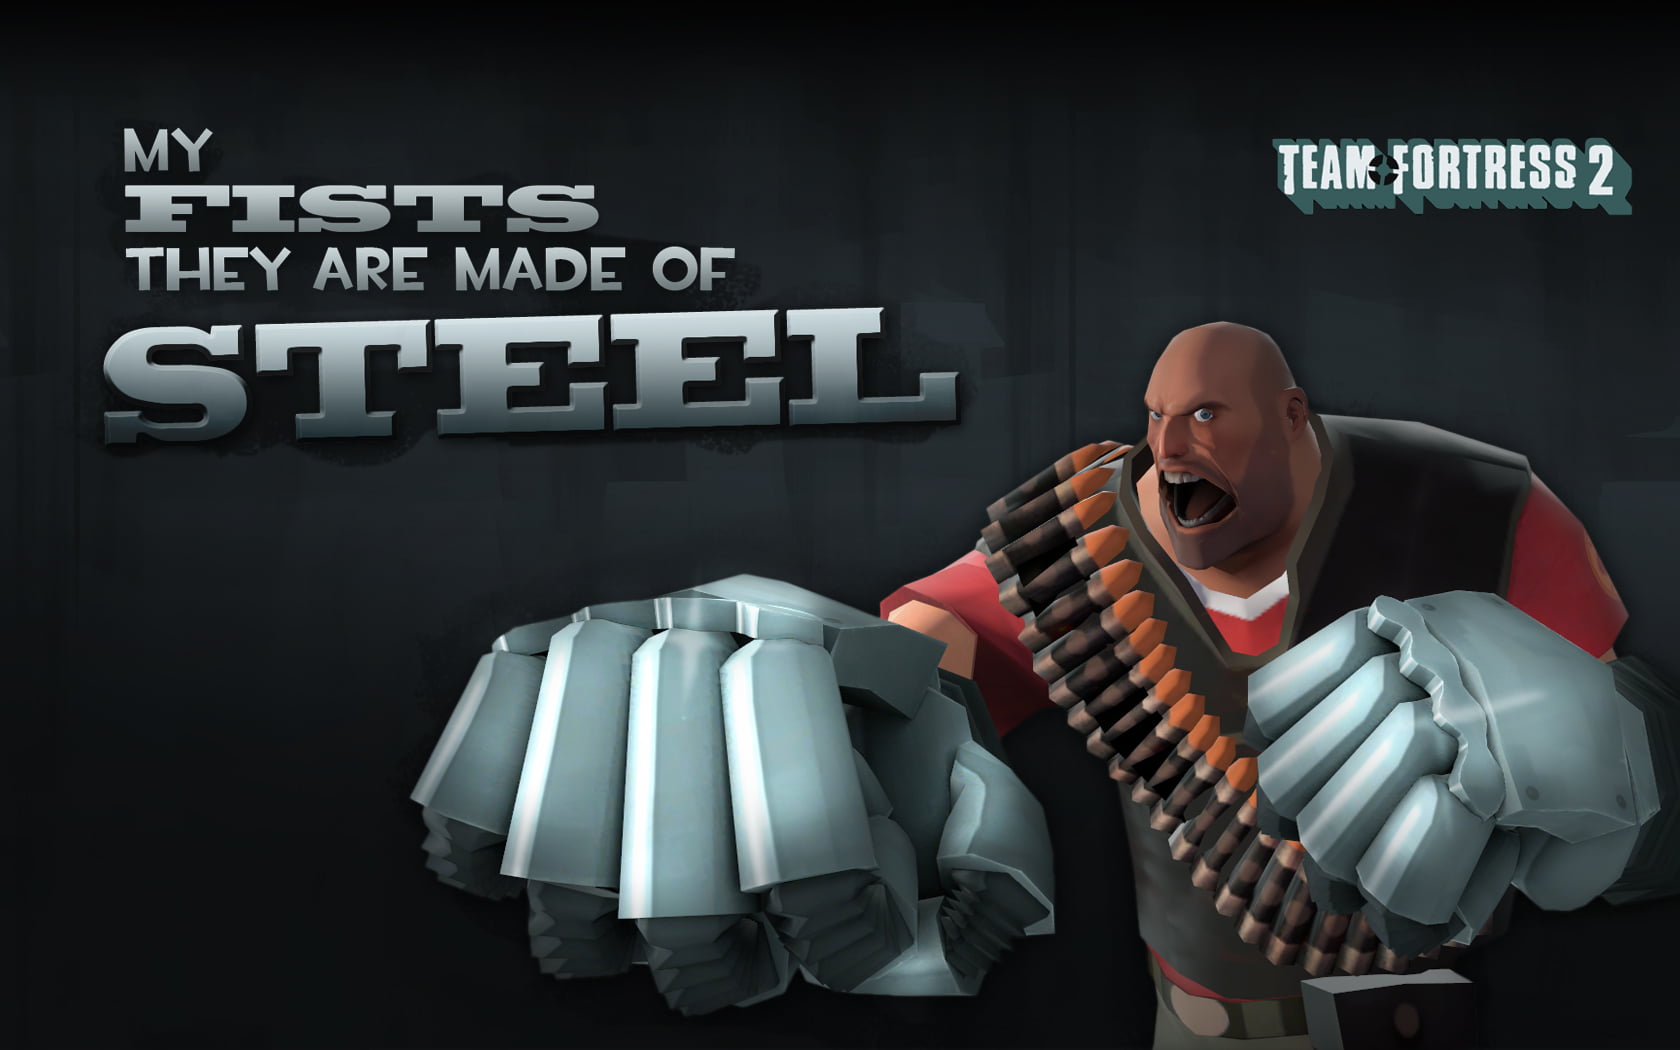 Team Fortress 2, Heavy (charater), communication, one person